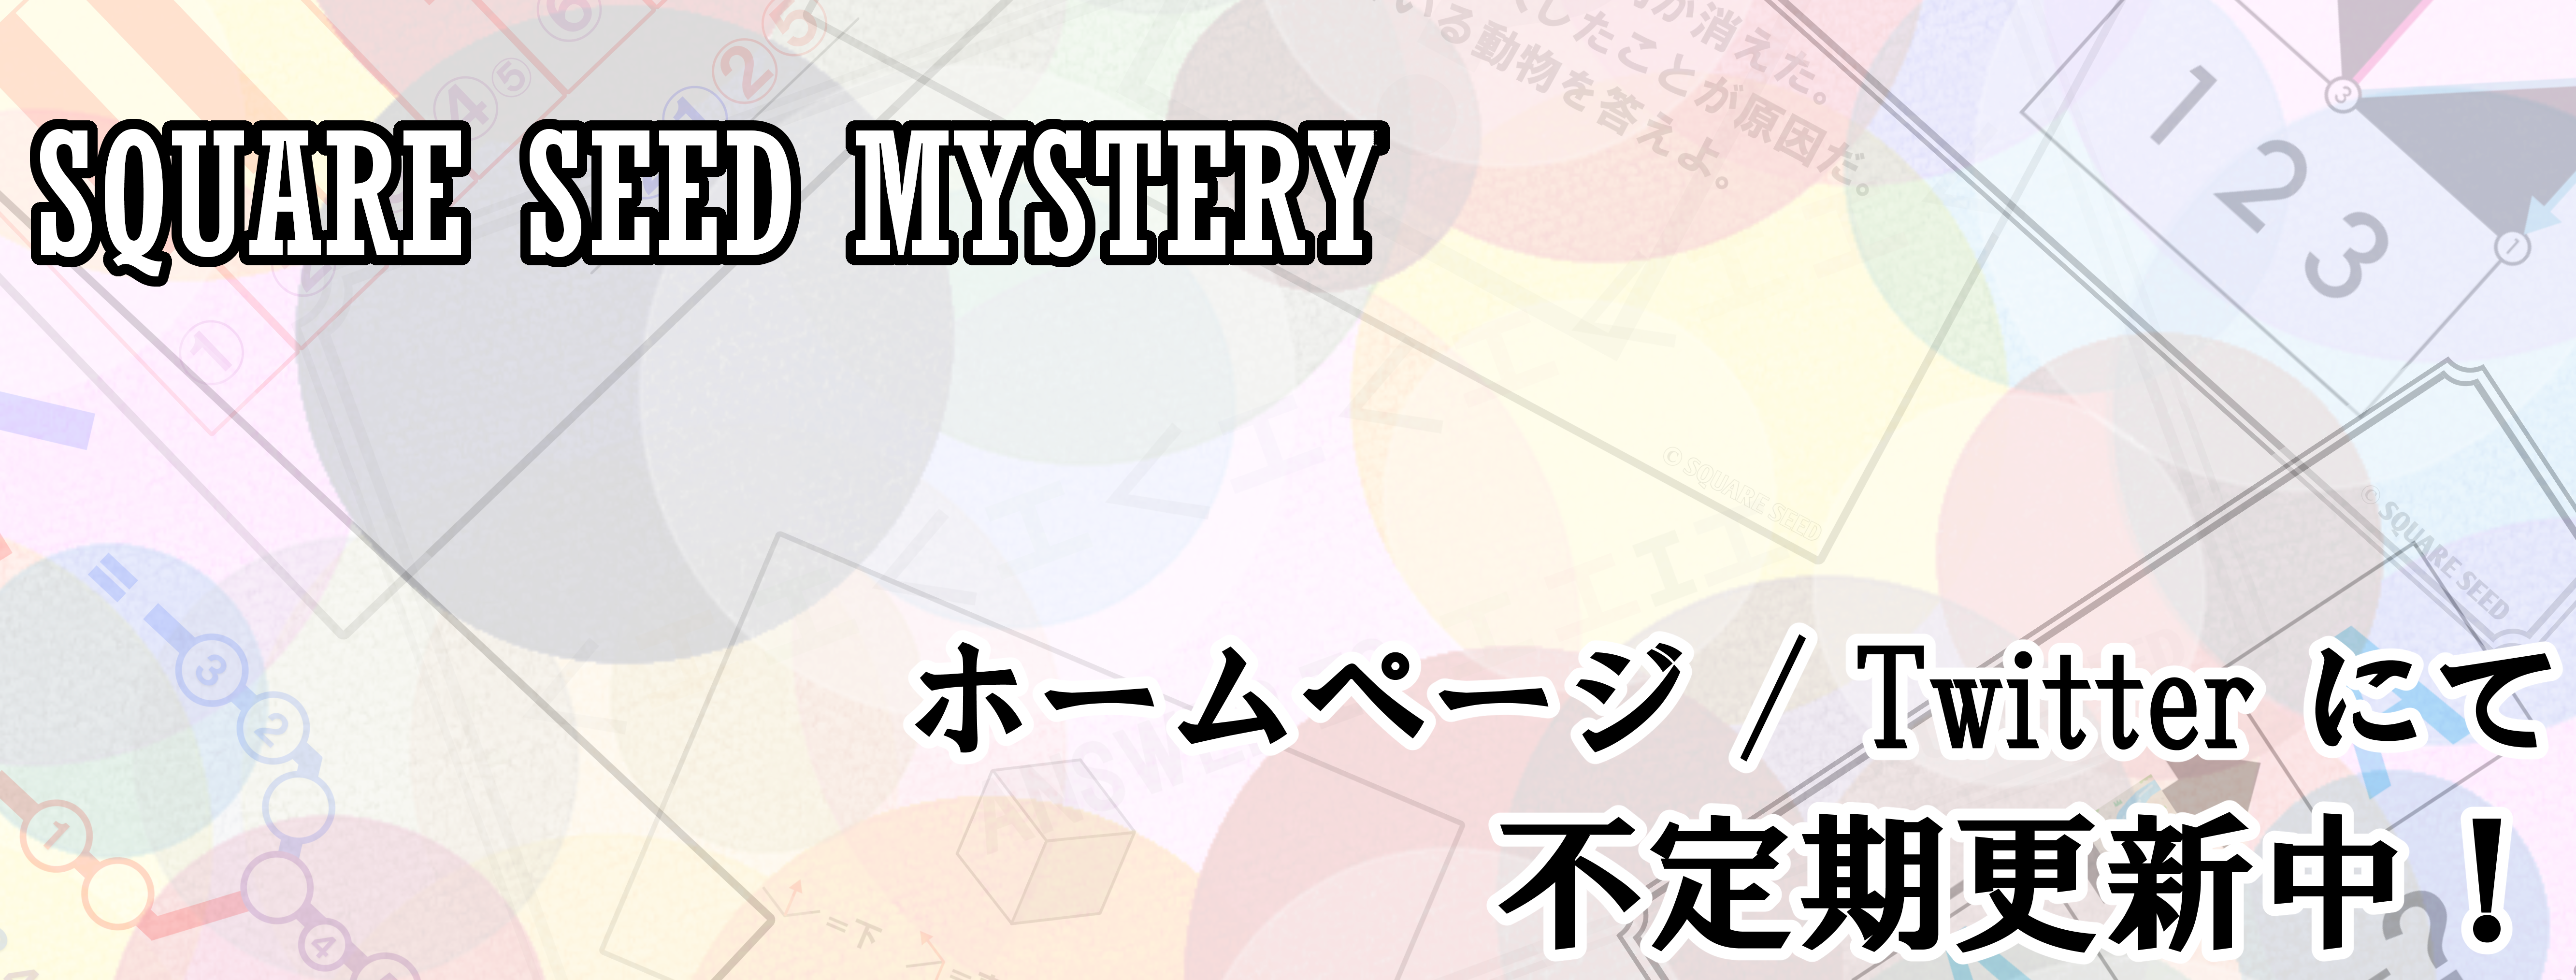 Mystery-SQUARE SEED-